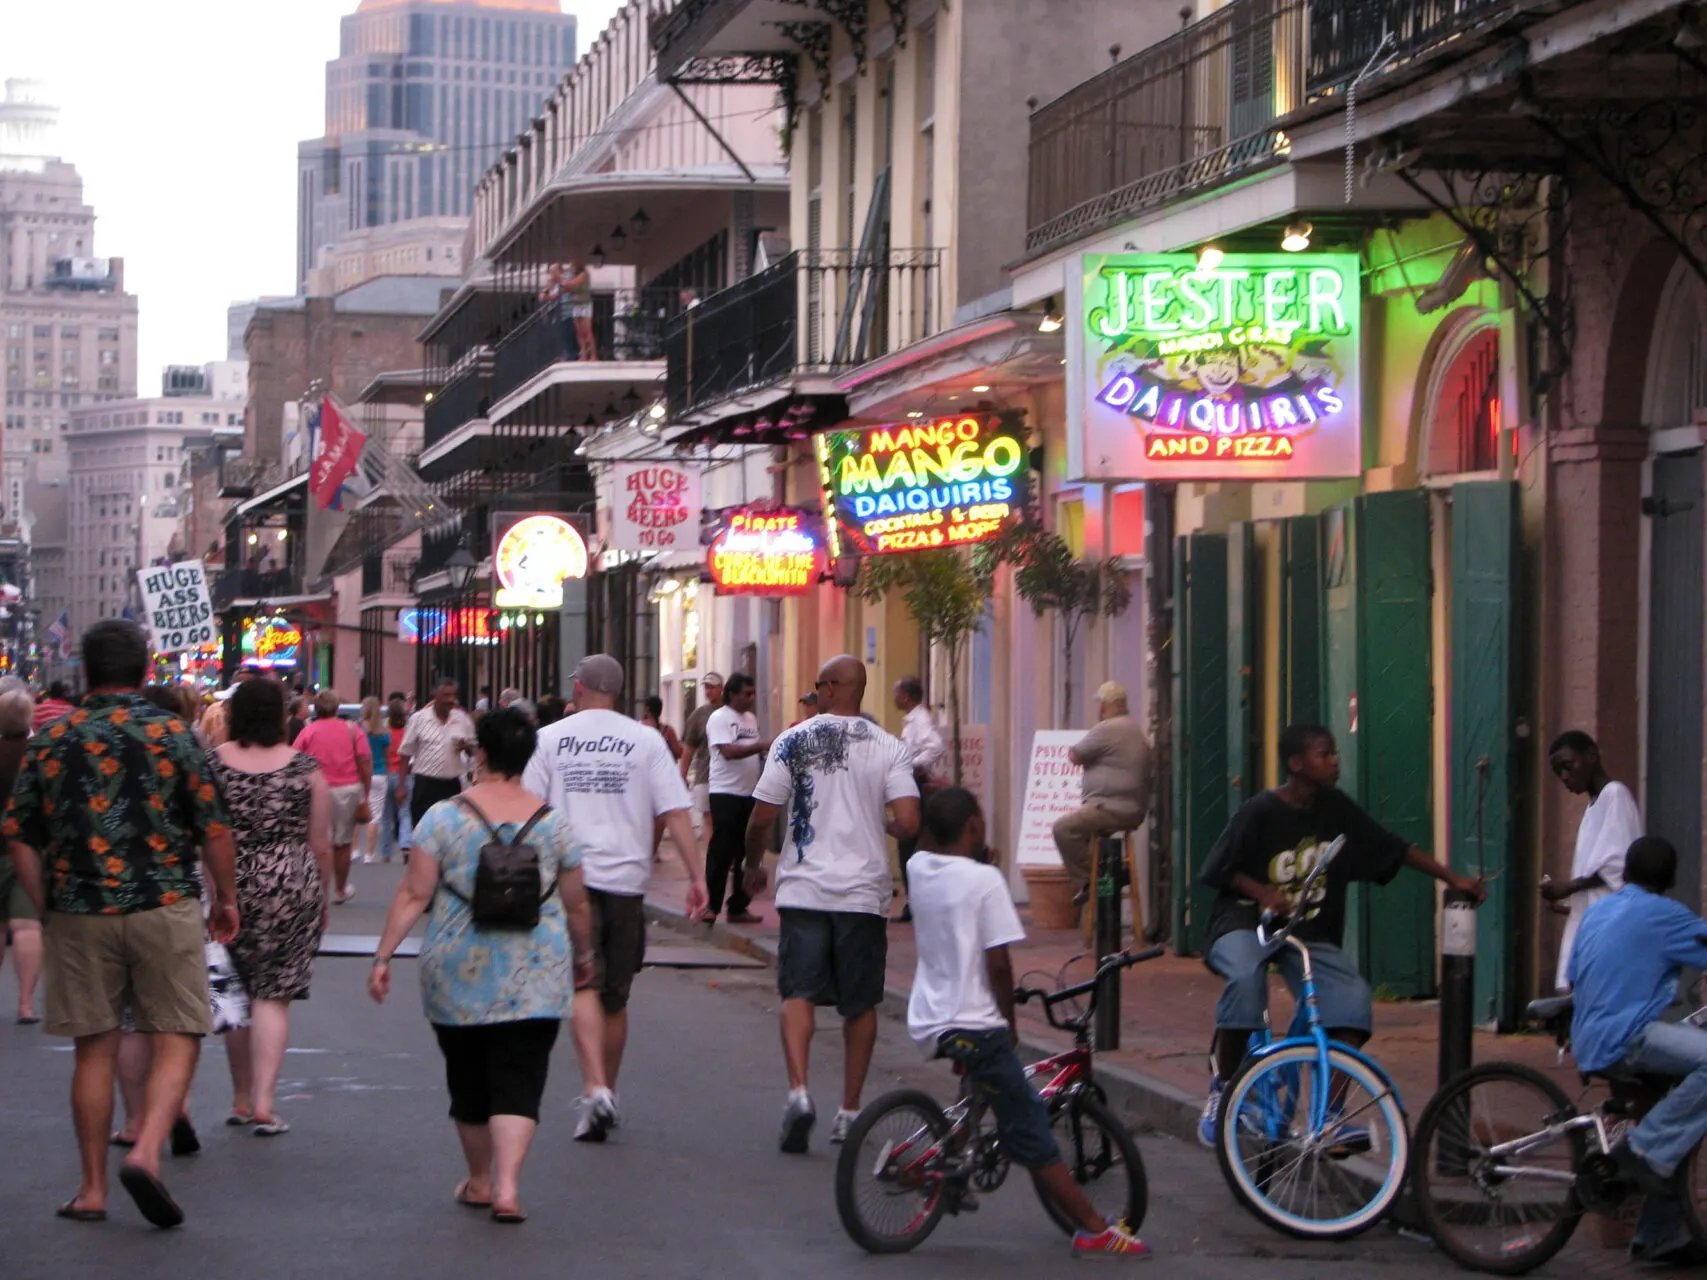 Walking around the French Quarter in the evening is a full-on New Orleans experience.